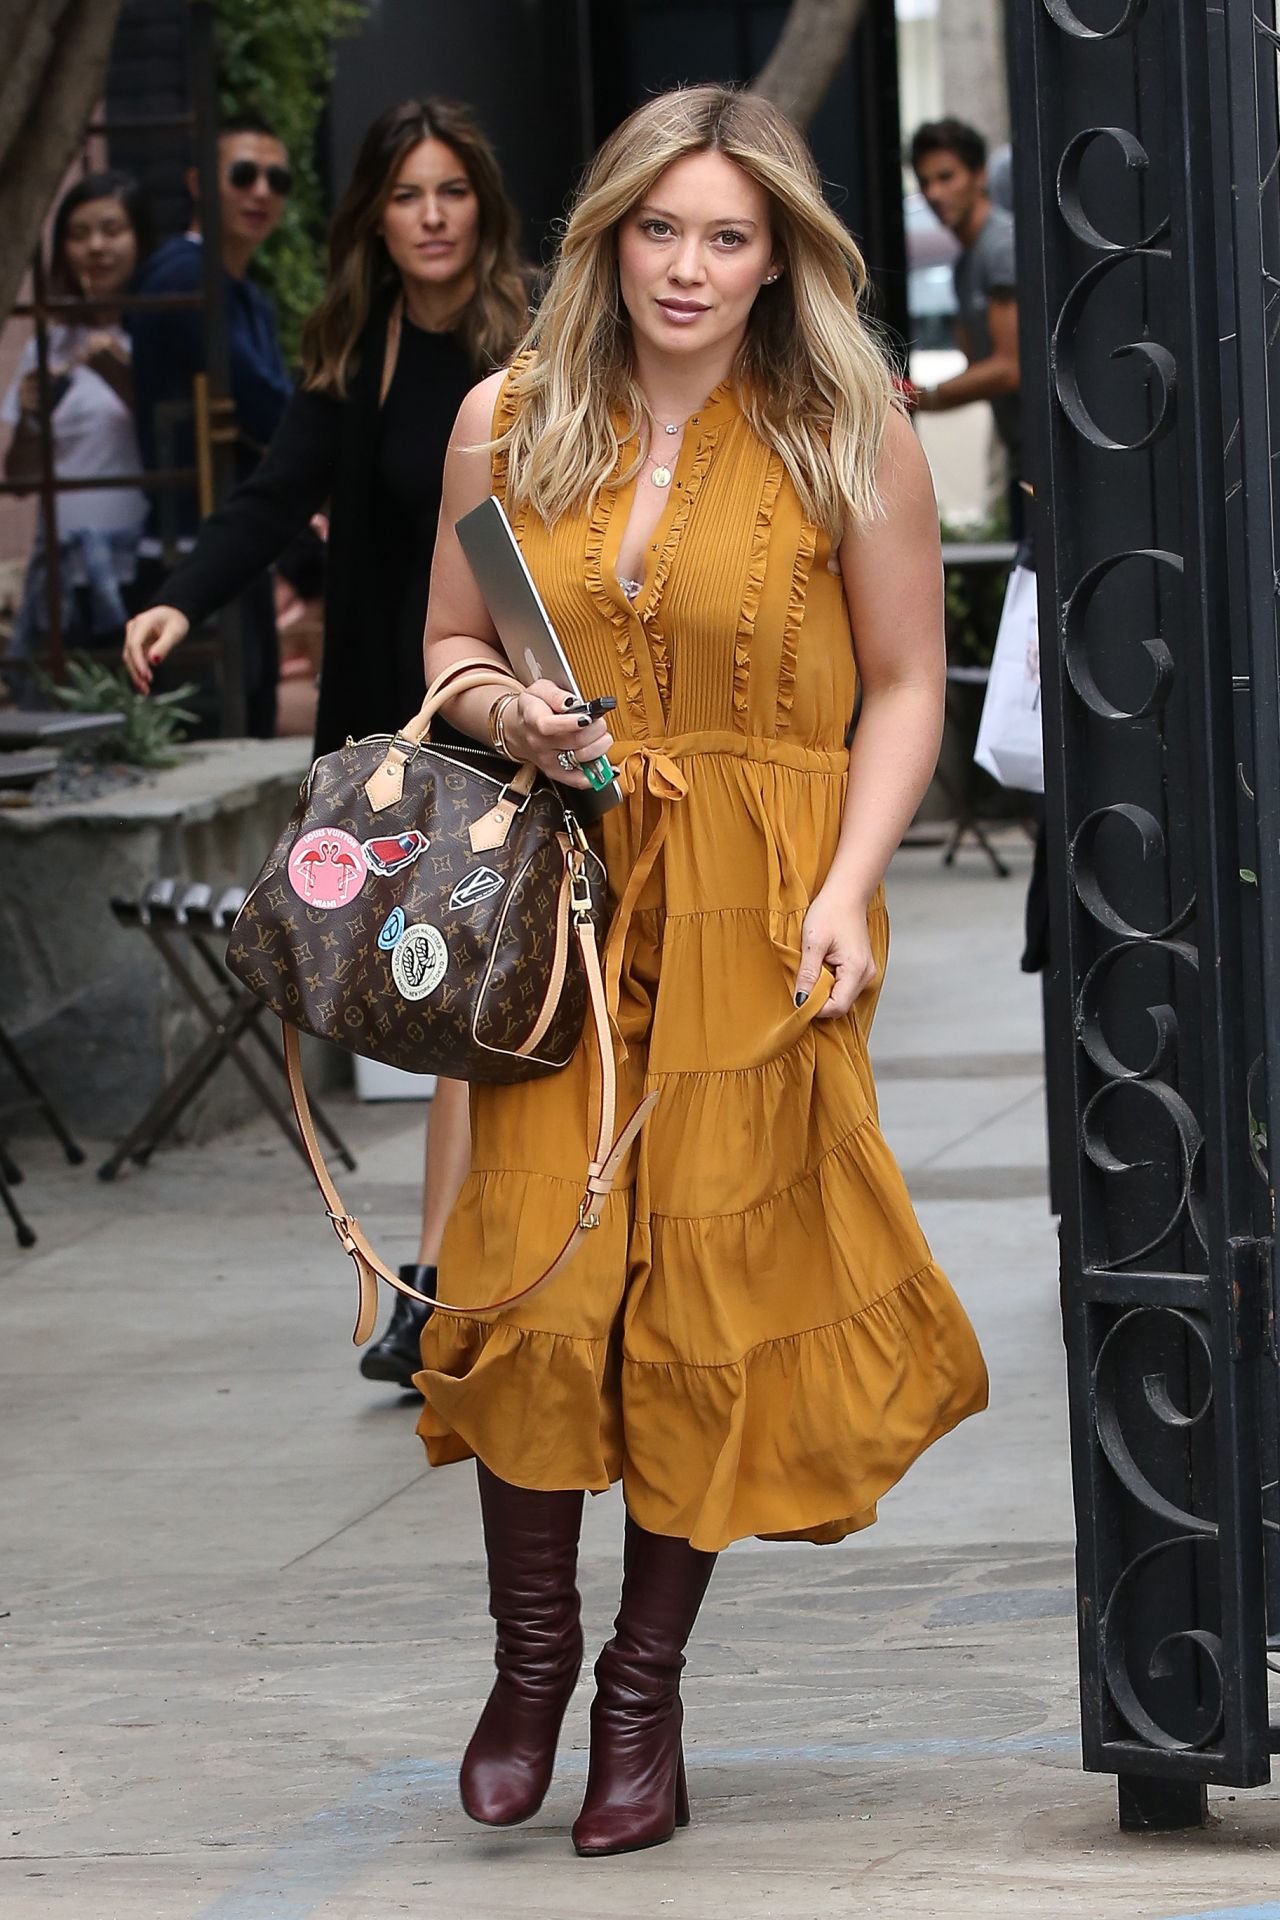 hilary-duff-arrives-for-an-appointment-at-901-hair-salon-louis